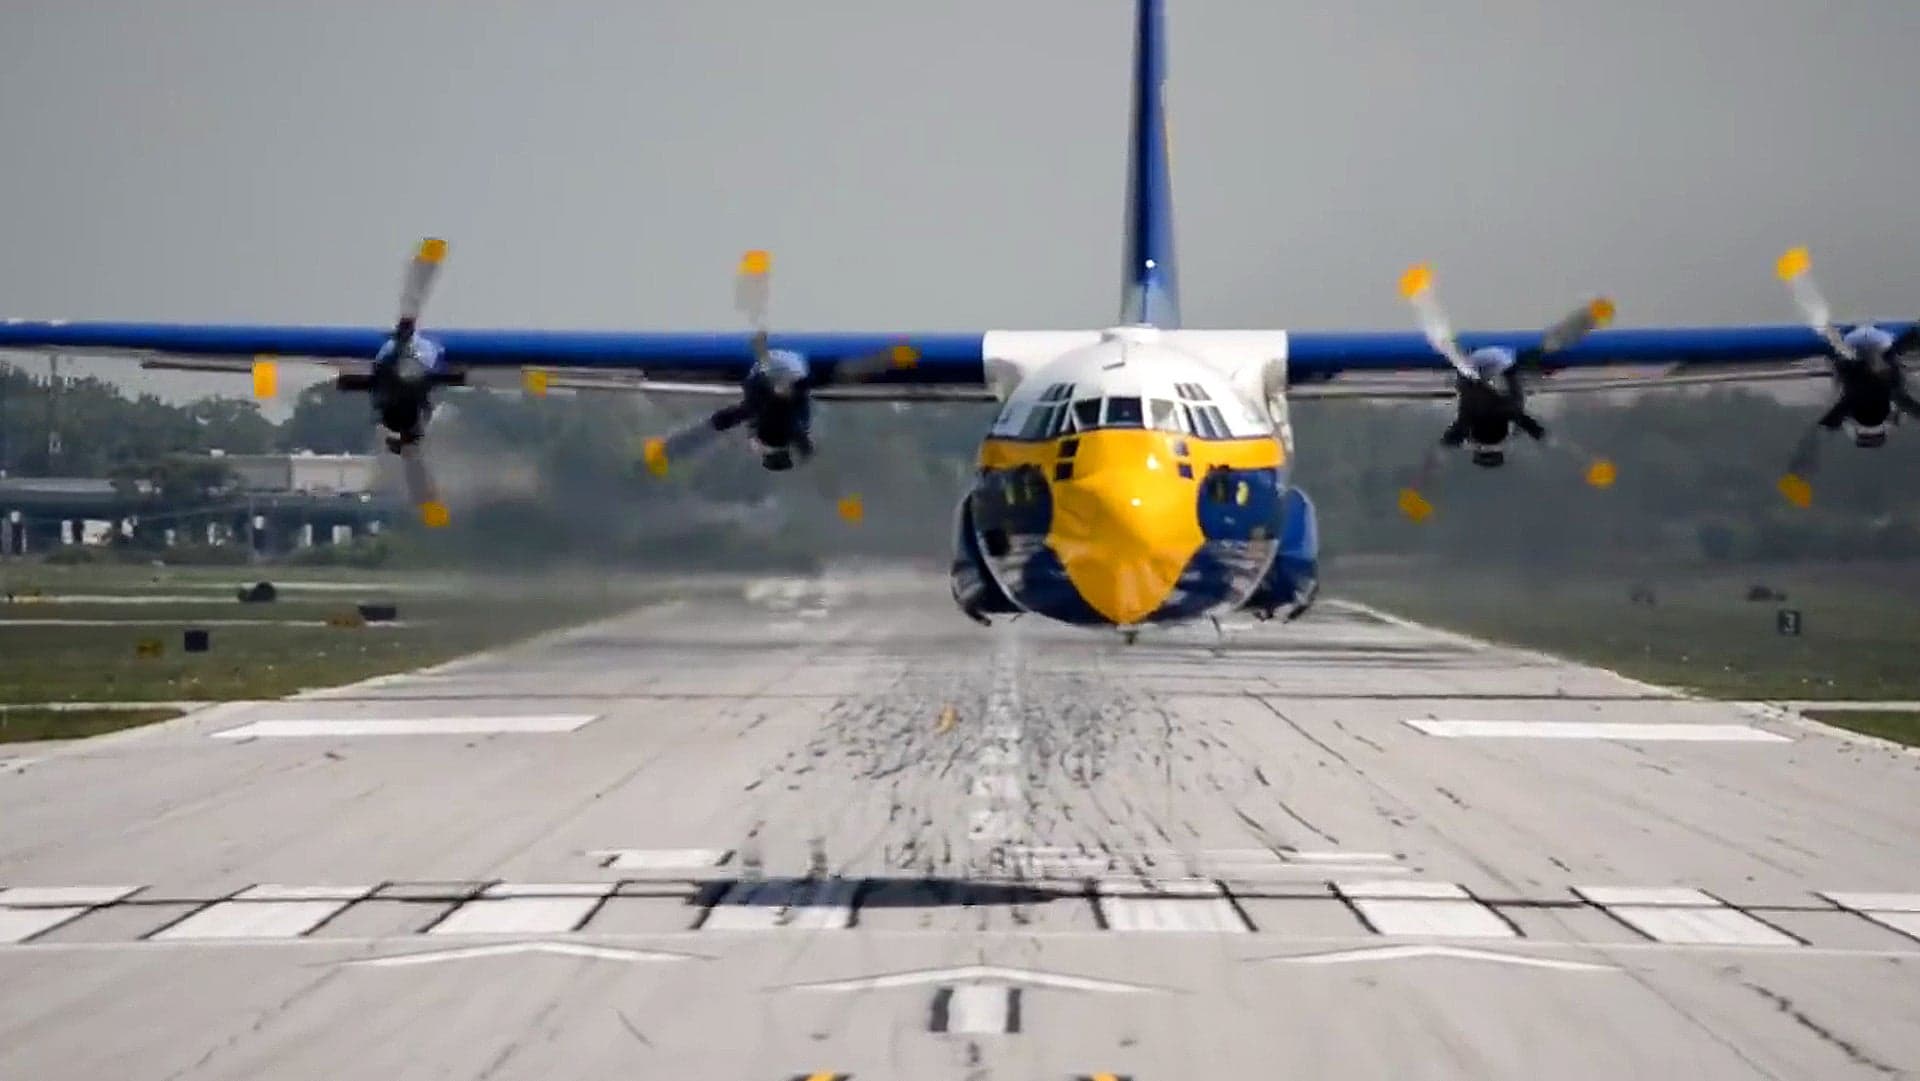 Fat Albert C-130 Gives You A Buzz Cut In This Crazy Head-On Takeoff Video